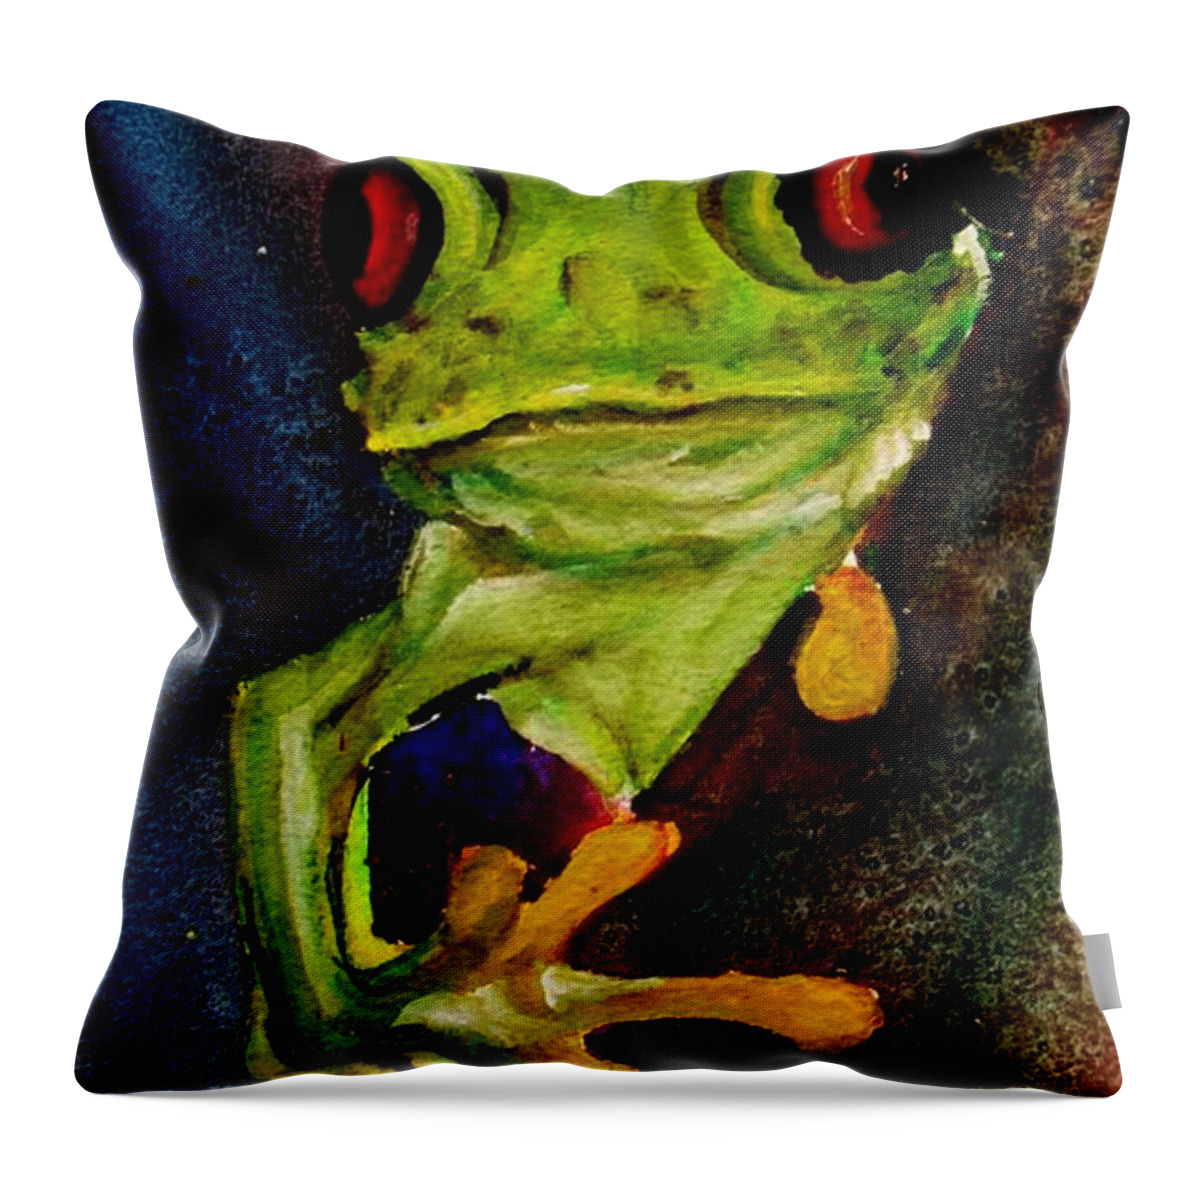 Frog Throw Pillow featuring the painting Feeling a Little Froggy by Lil Taylor